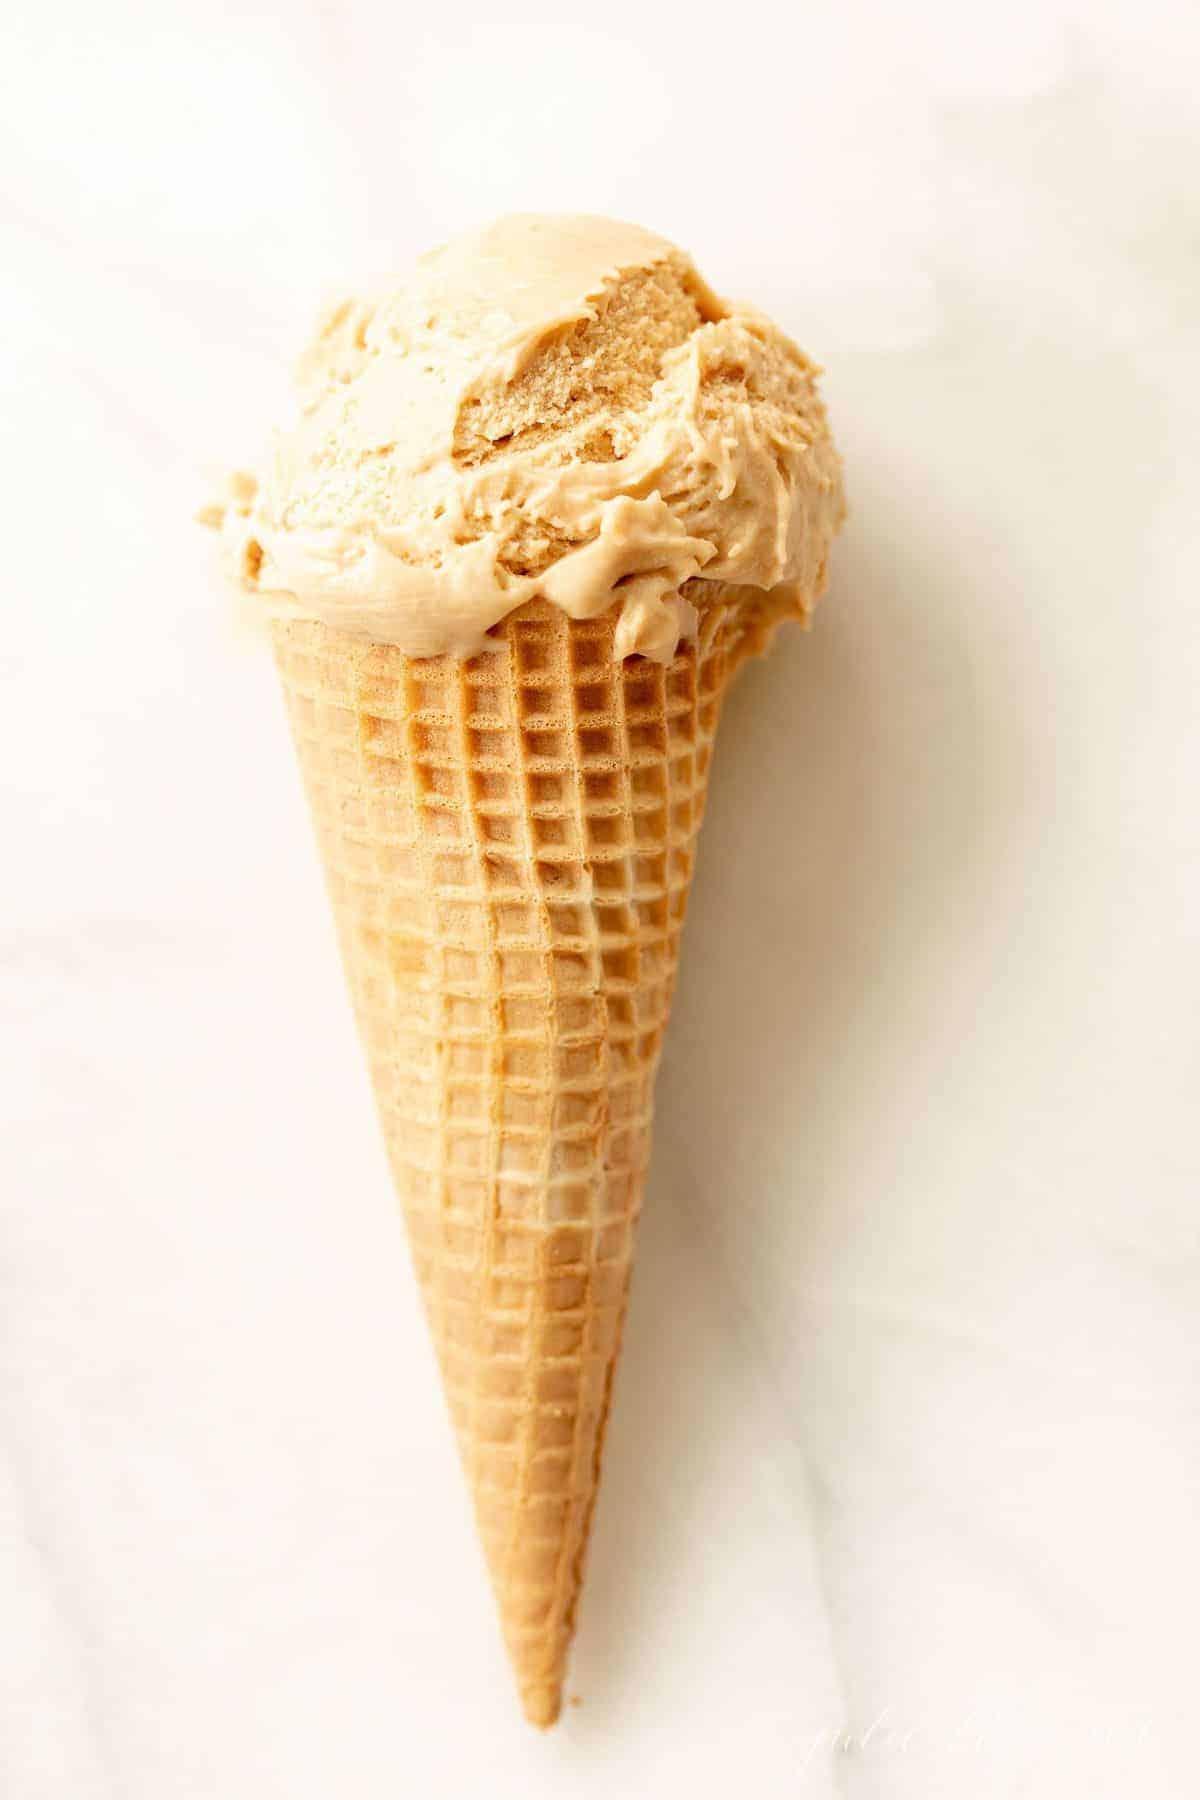 A waffle ice cream cone on a marble surface, filled with homemade speculoos ice cream. #cookiebuttericecream